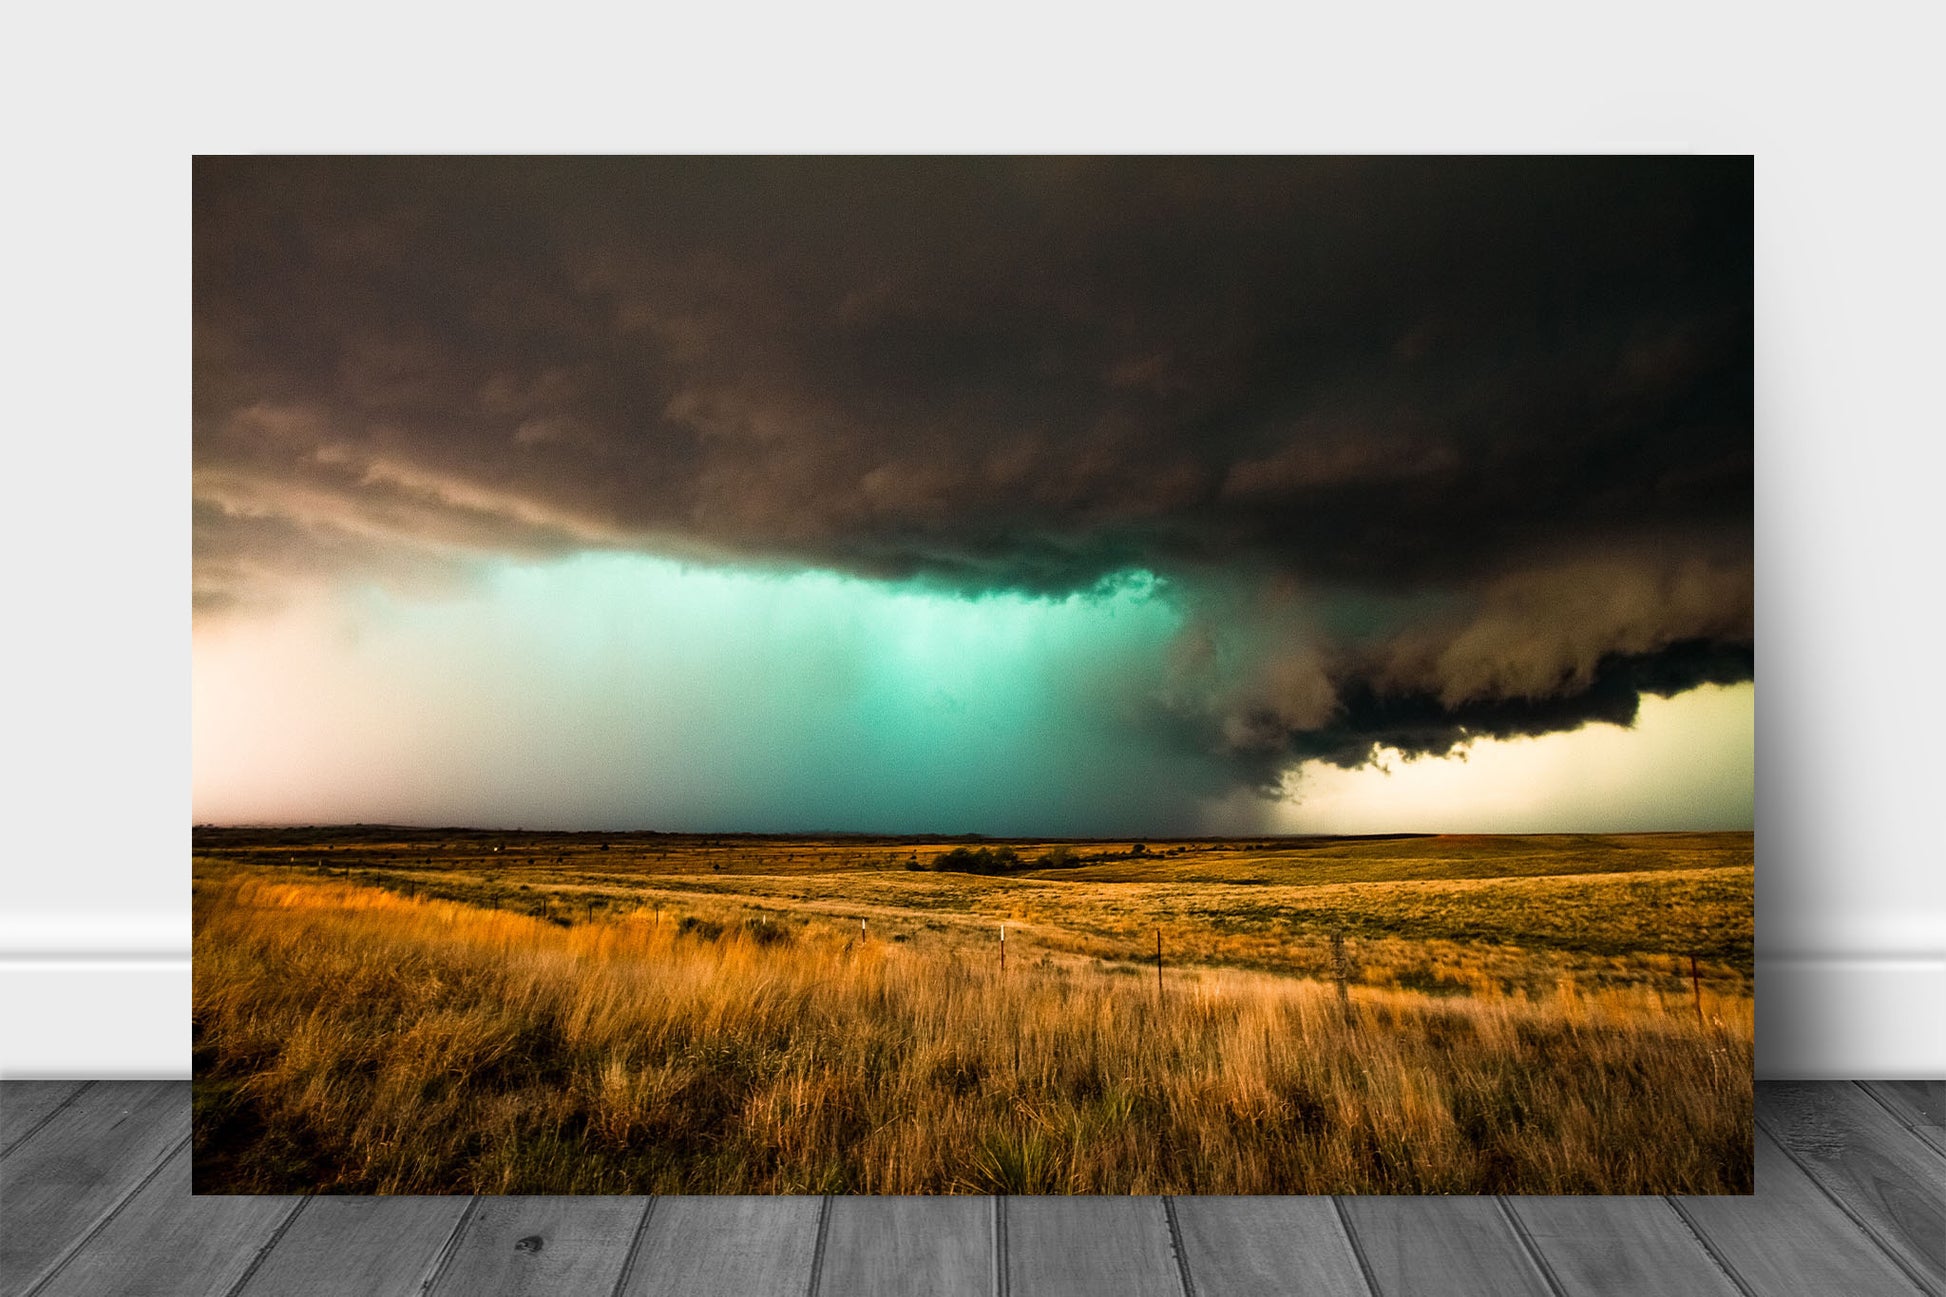 Storm metal print on aluminum of a supercell thunderstorm with a teal hail core over open prairie on a spring day in the Texas panhandle by Sean Ramsey of Southern Plains Photography.